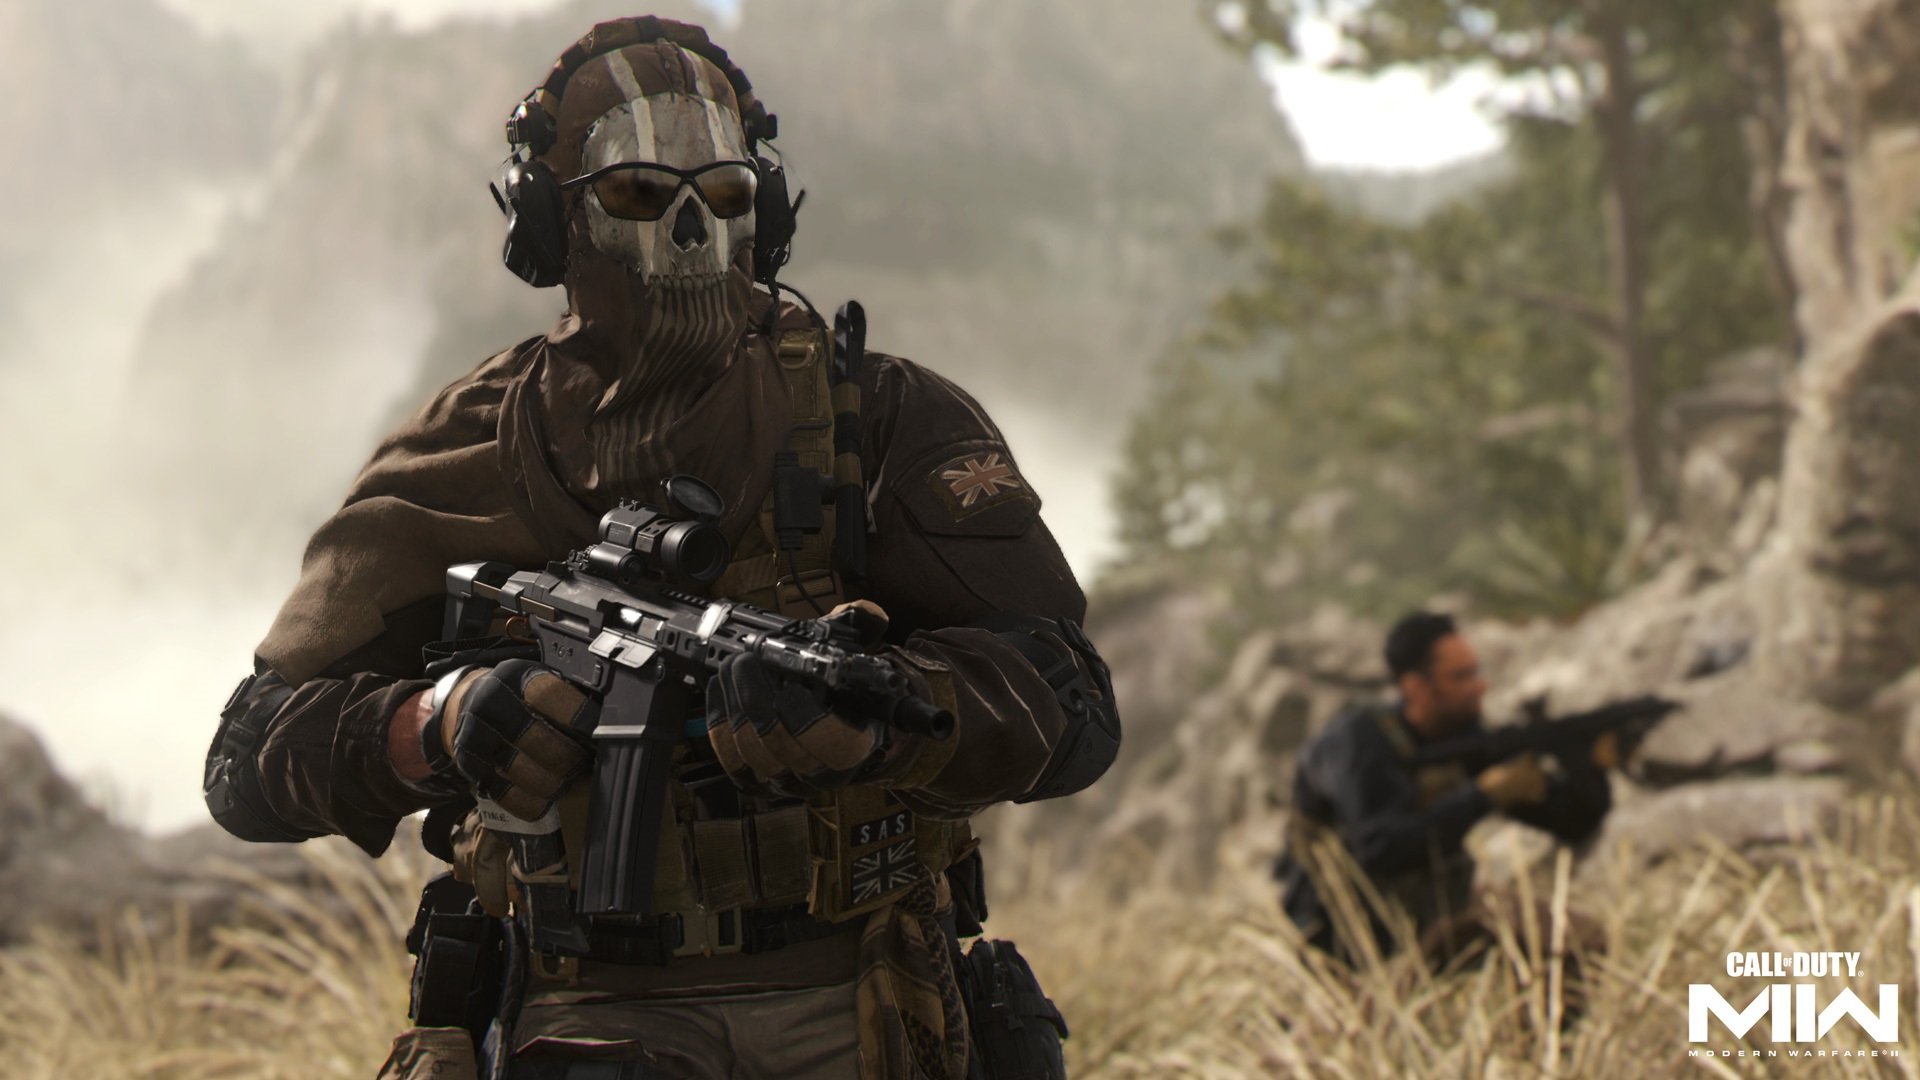 Call of Duty: Modern Warfare 2 Campaign Remastered leaked, seemingly coming  soon